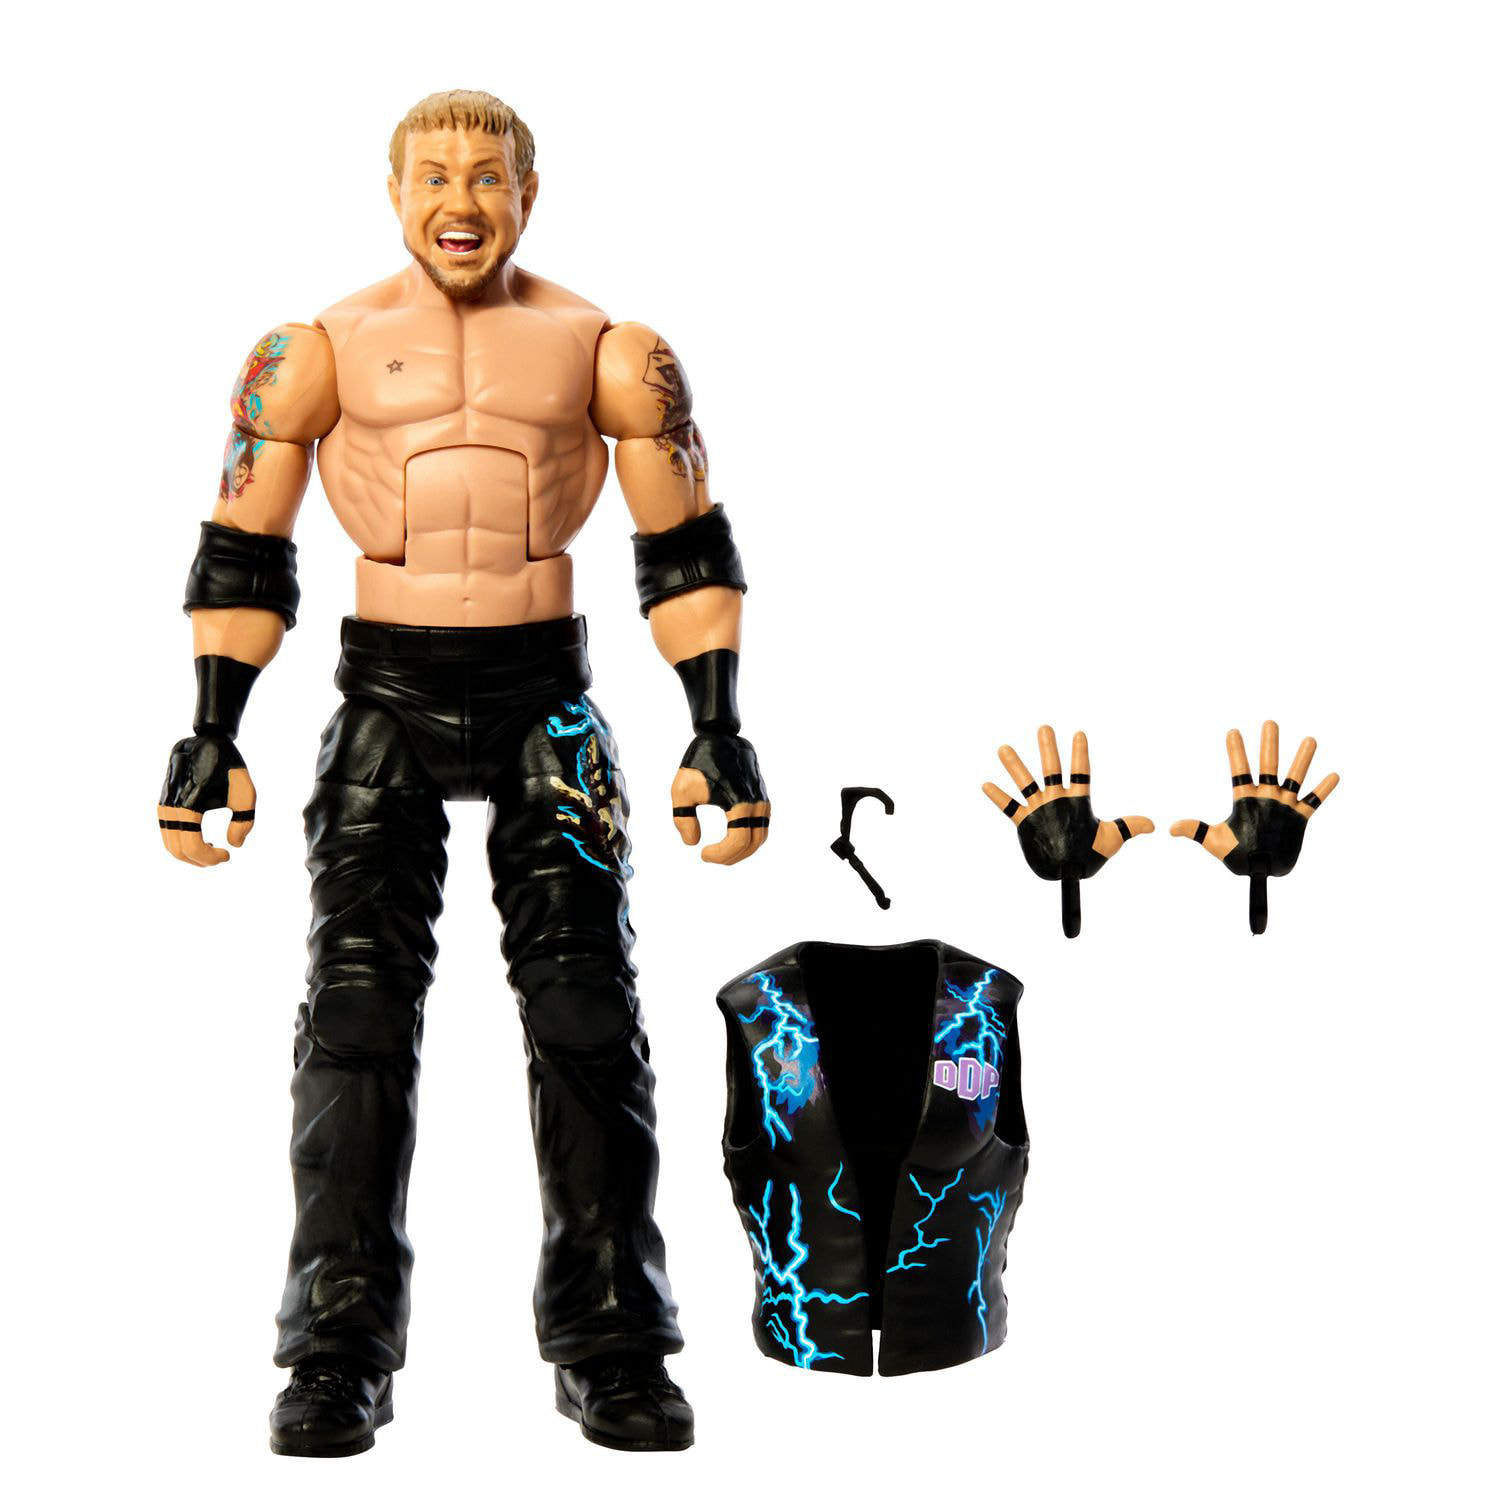 WWE Elite Collection Diamond Dallas Page Greatest Hits Action Figure 